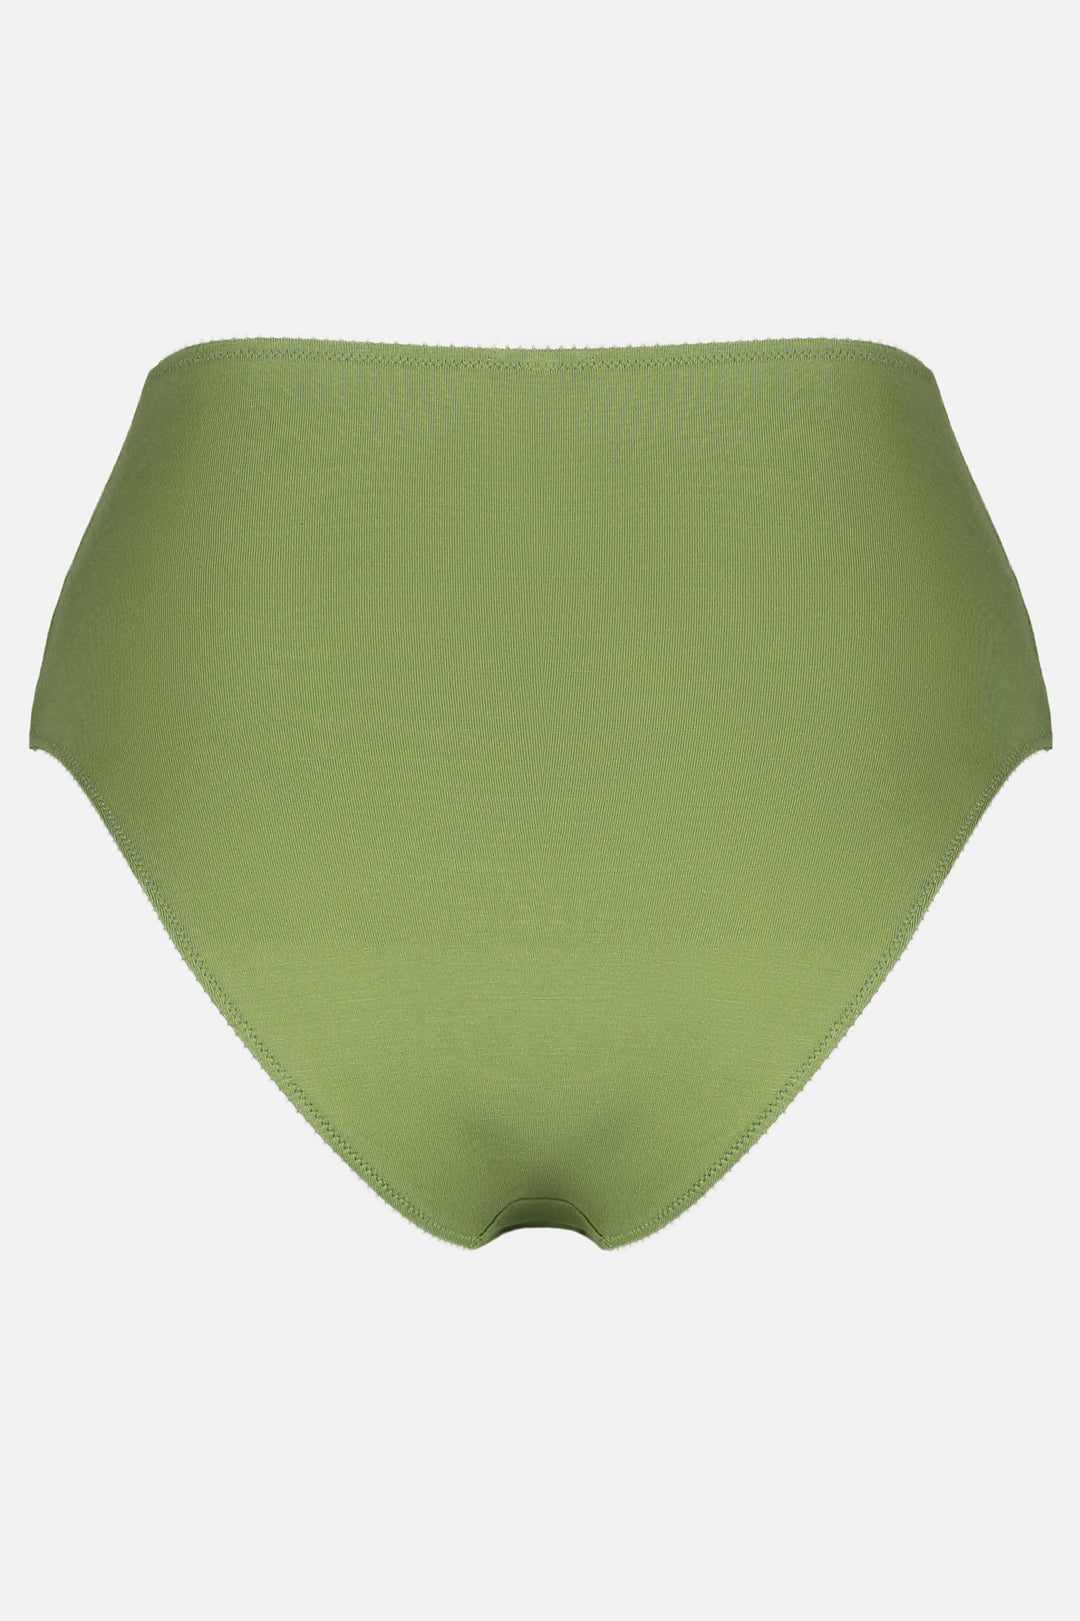 Videris Lingerie high waist knicker in olive blossom embroidered TENCEL™  with a flattering legline